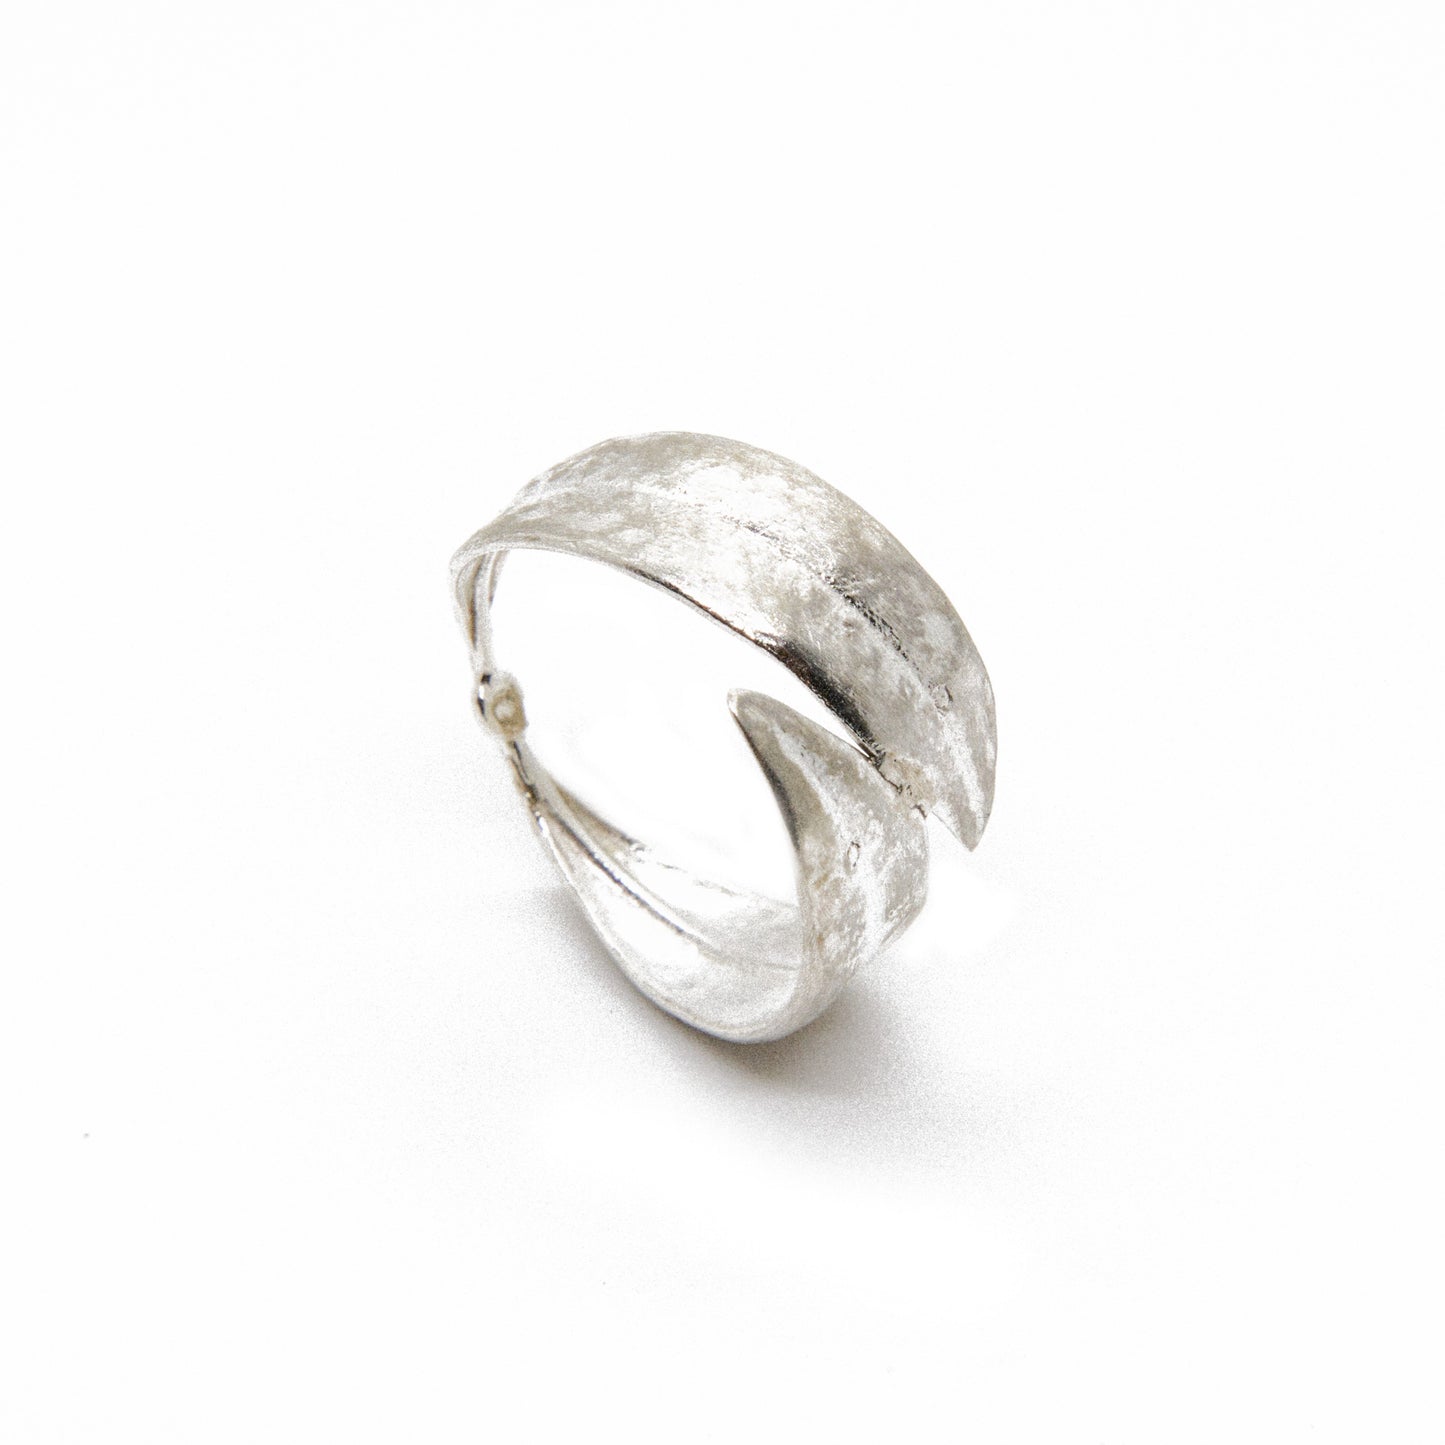 Handcrafted sterling silver ring adorned with unique and intricate olive leaves design, showcasing exquisite craftsmanship and individuality in a nature-inspired, one-of-a-kind jewelry piece